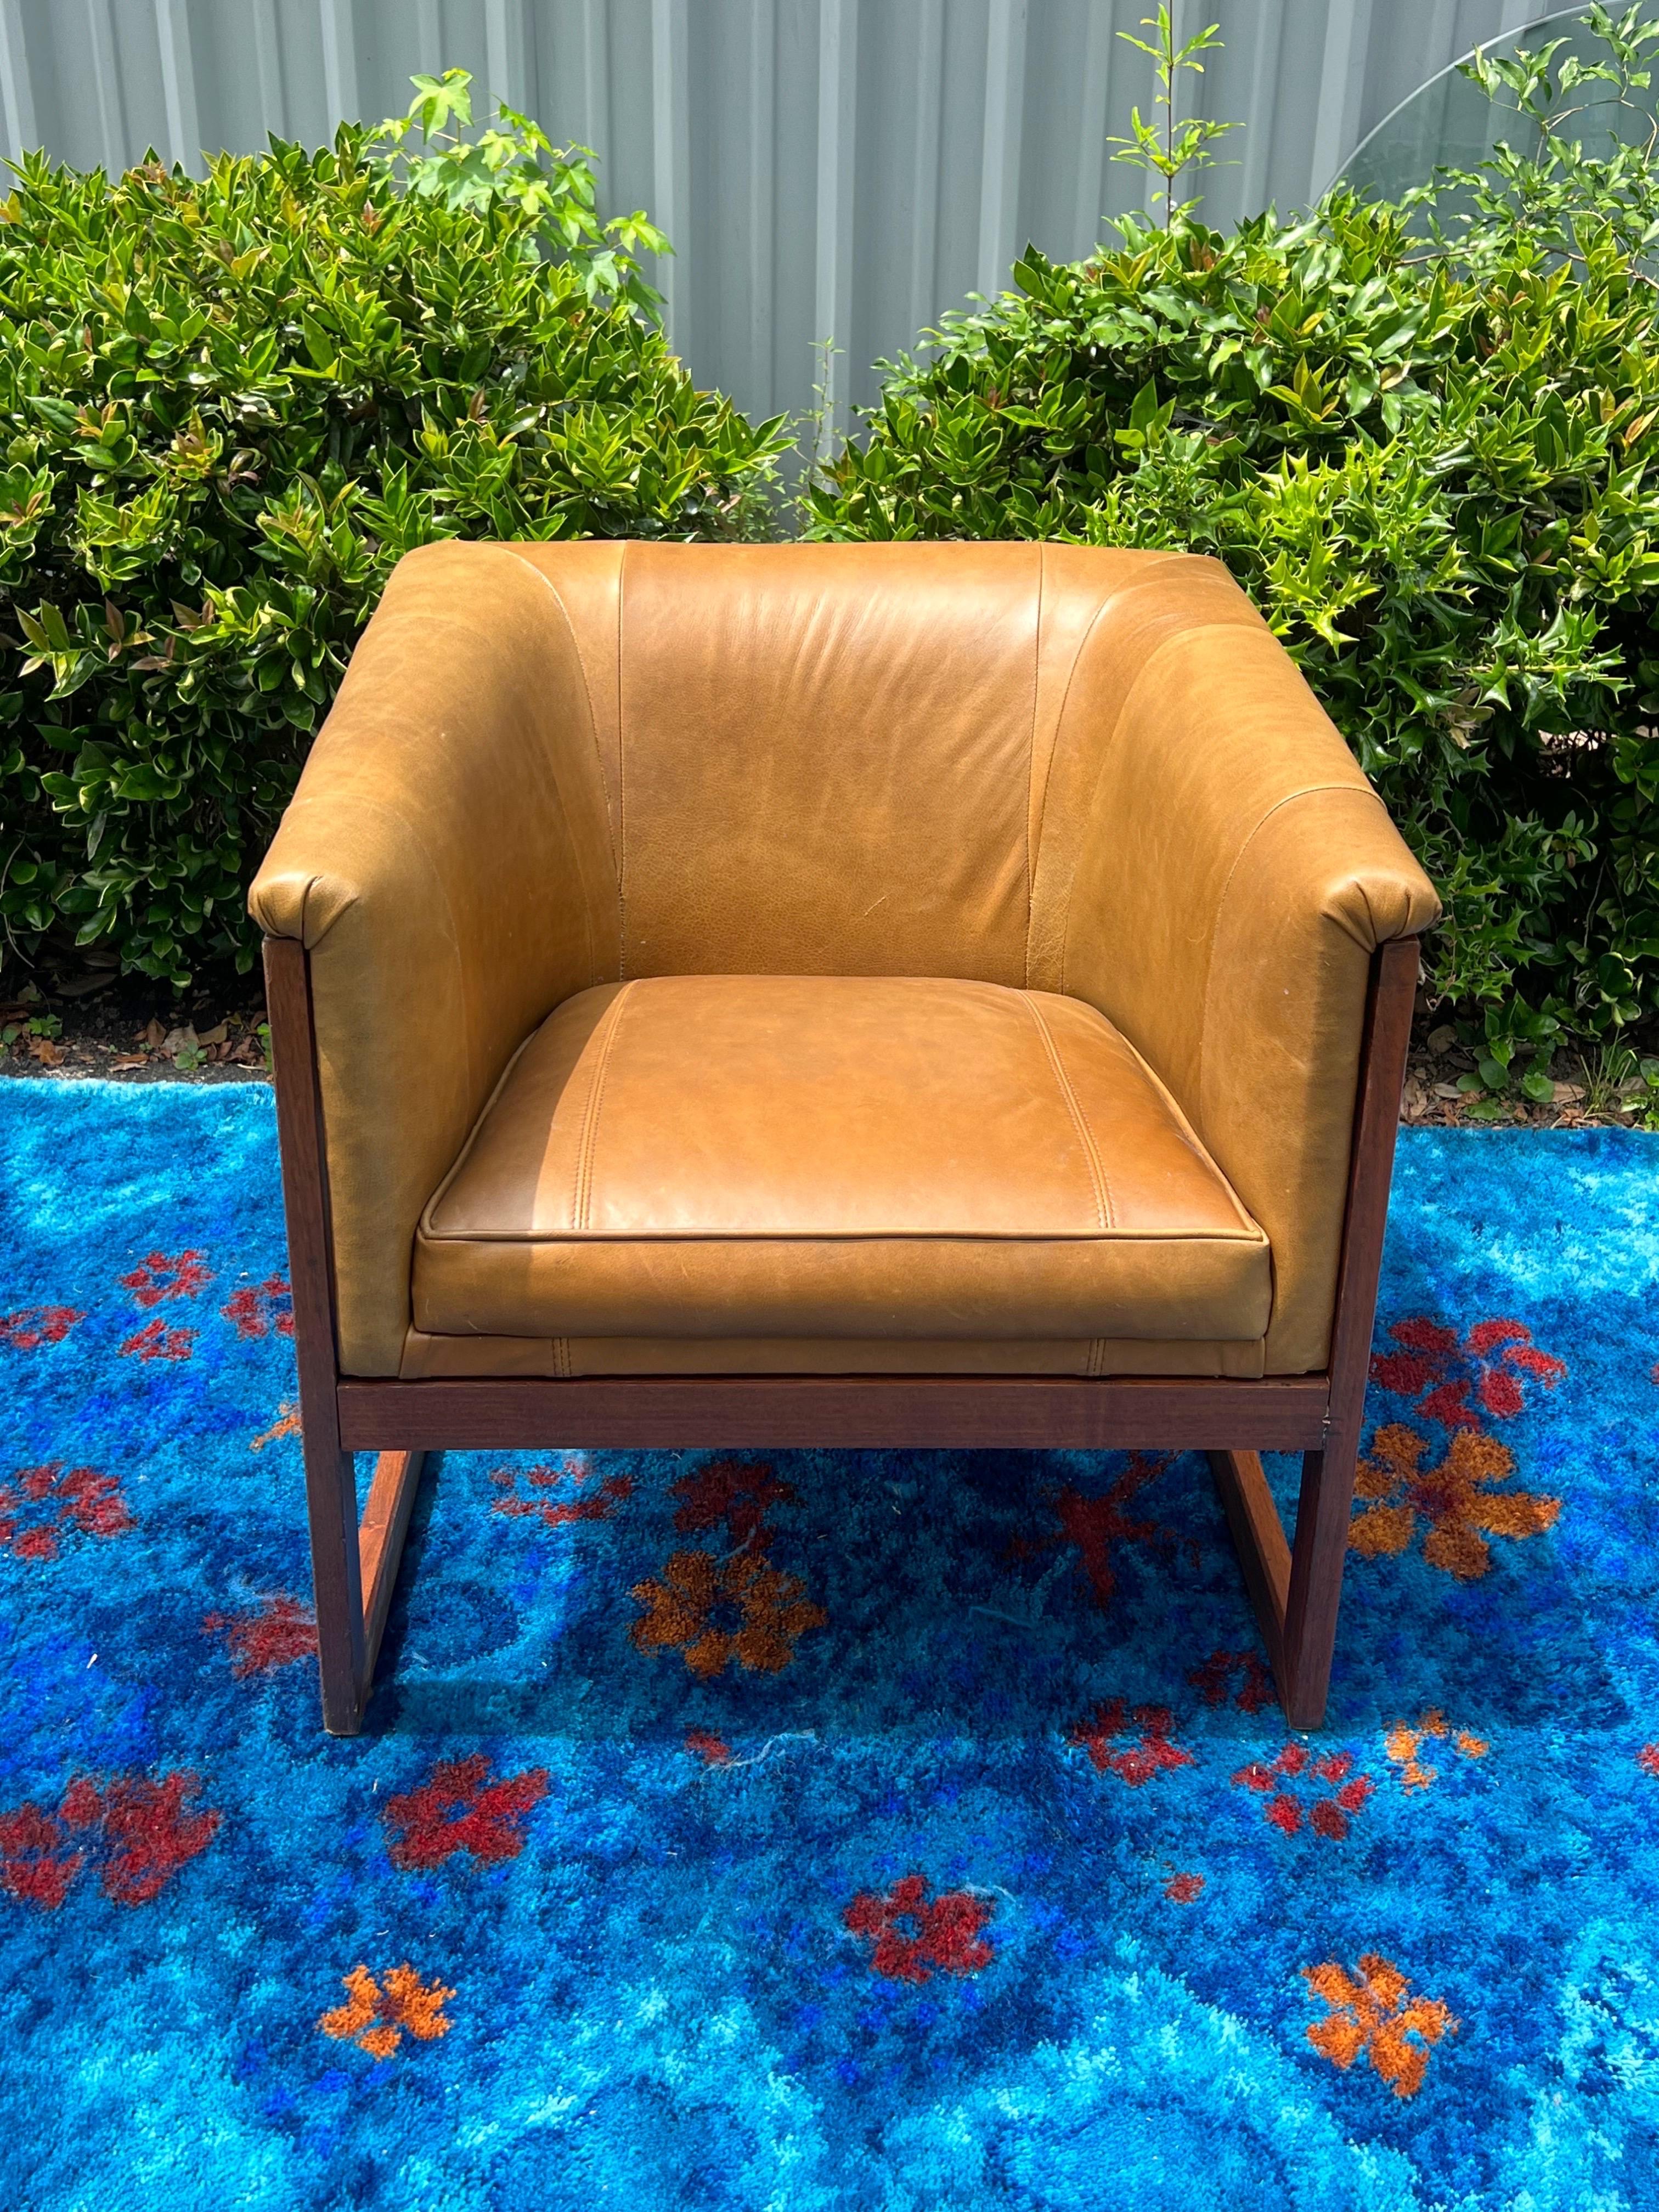 Newly upholstered in a buttery cognac vintage leather.  These chairs were not marked, so that’s why I must put “Milo Baughman Style”.   This chair has a sleek frame and the pitch makes the chair super comfortable.